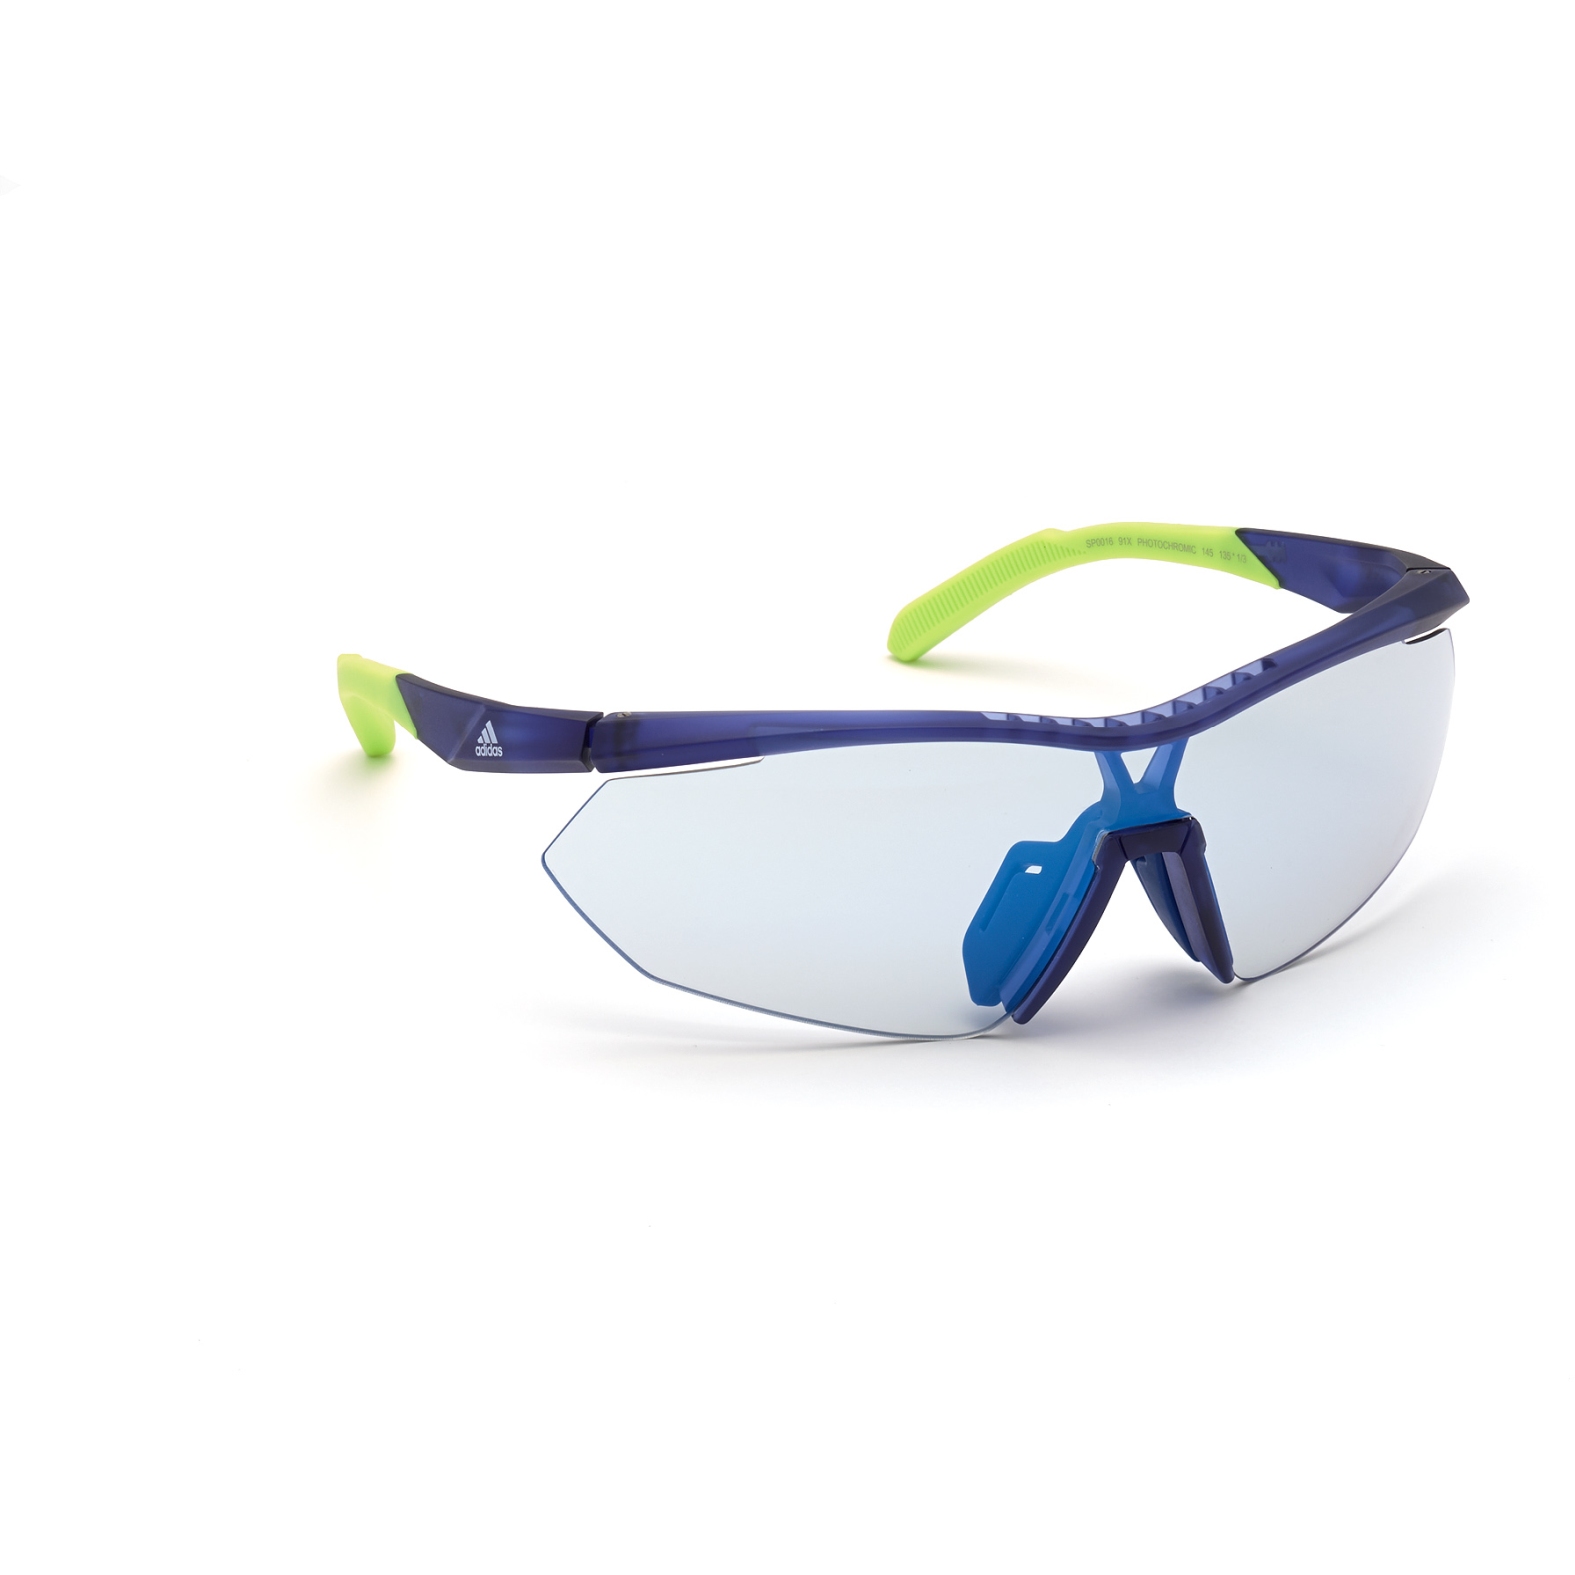 Image of adidas Sp0016 Injected Sport Sunglasses - Frosted Blue / Vario Mirror Blue